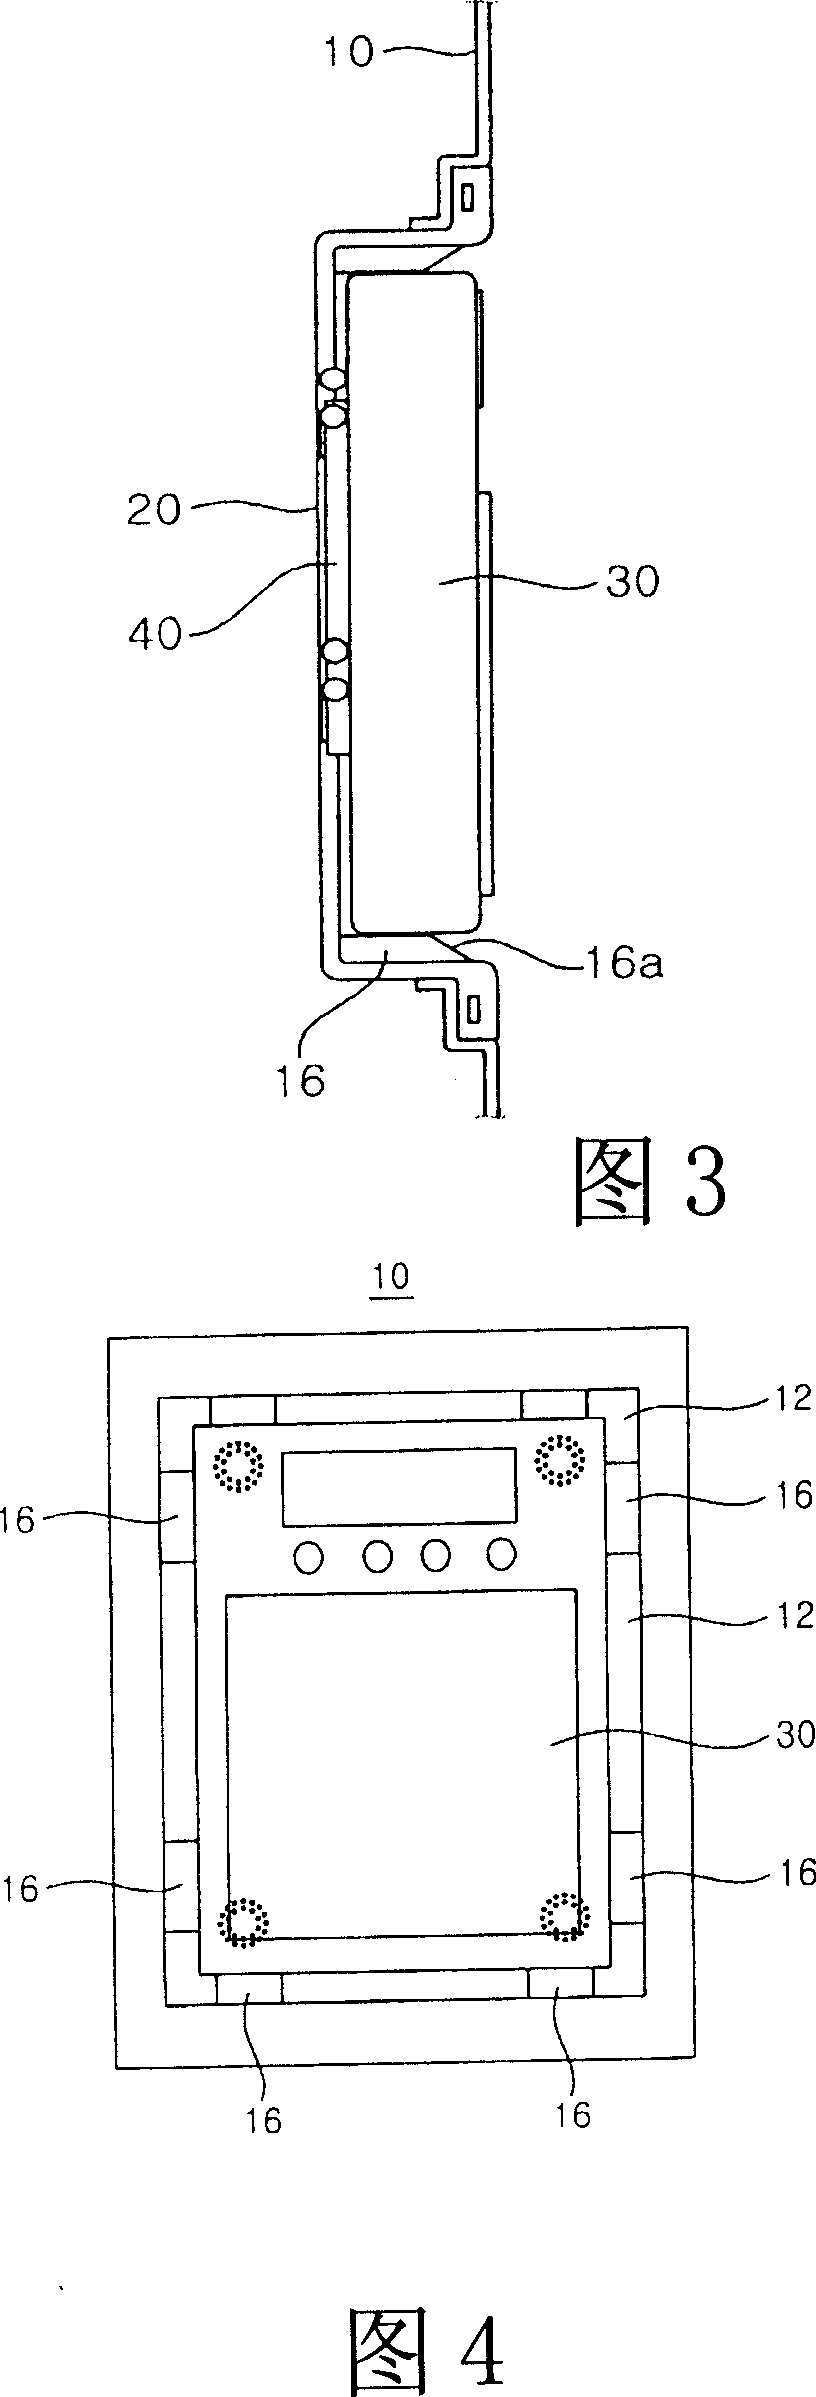 Mounting structure for display screen of refrigerator